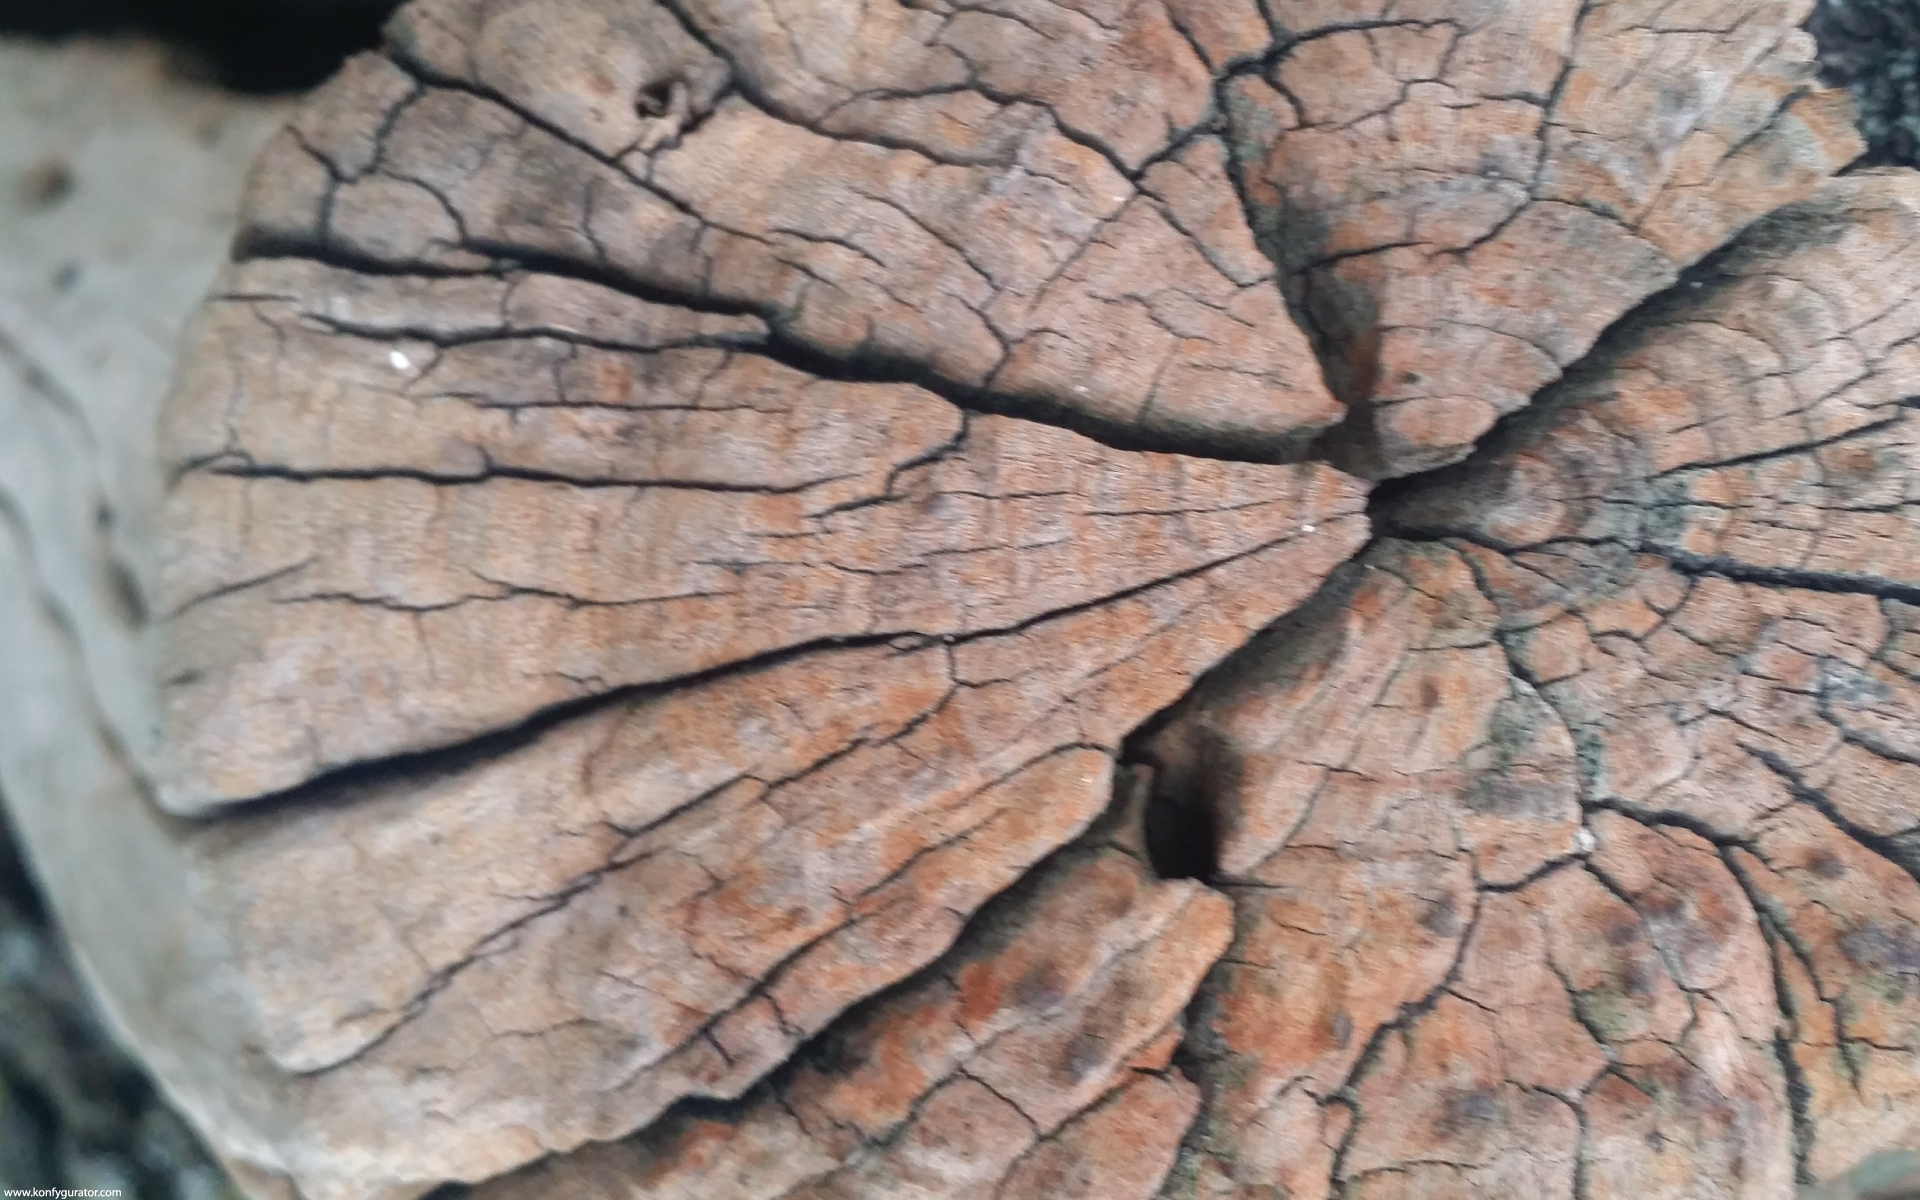 HD Wallpapers - Textures - stump, old, hive, cracked